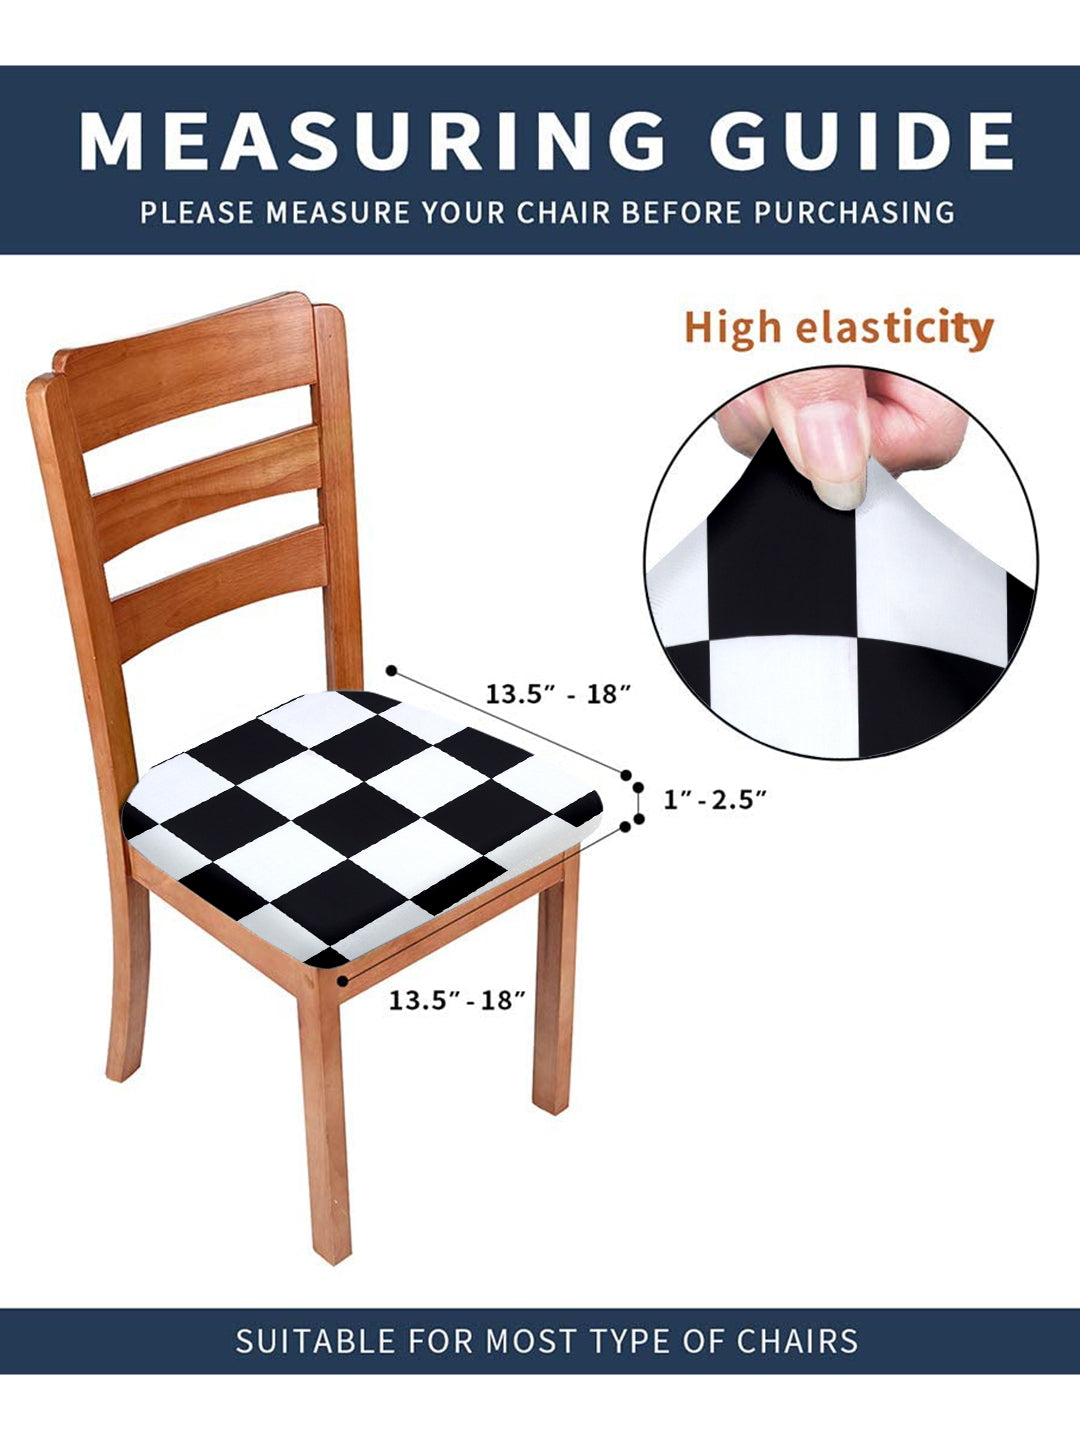 Stretchable Checks Printed Non Slip Chair Pad Cover Pack of 6- Black & White